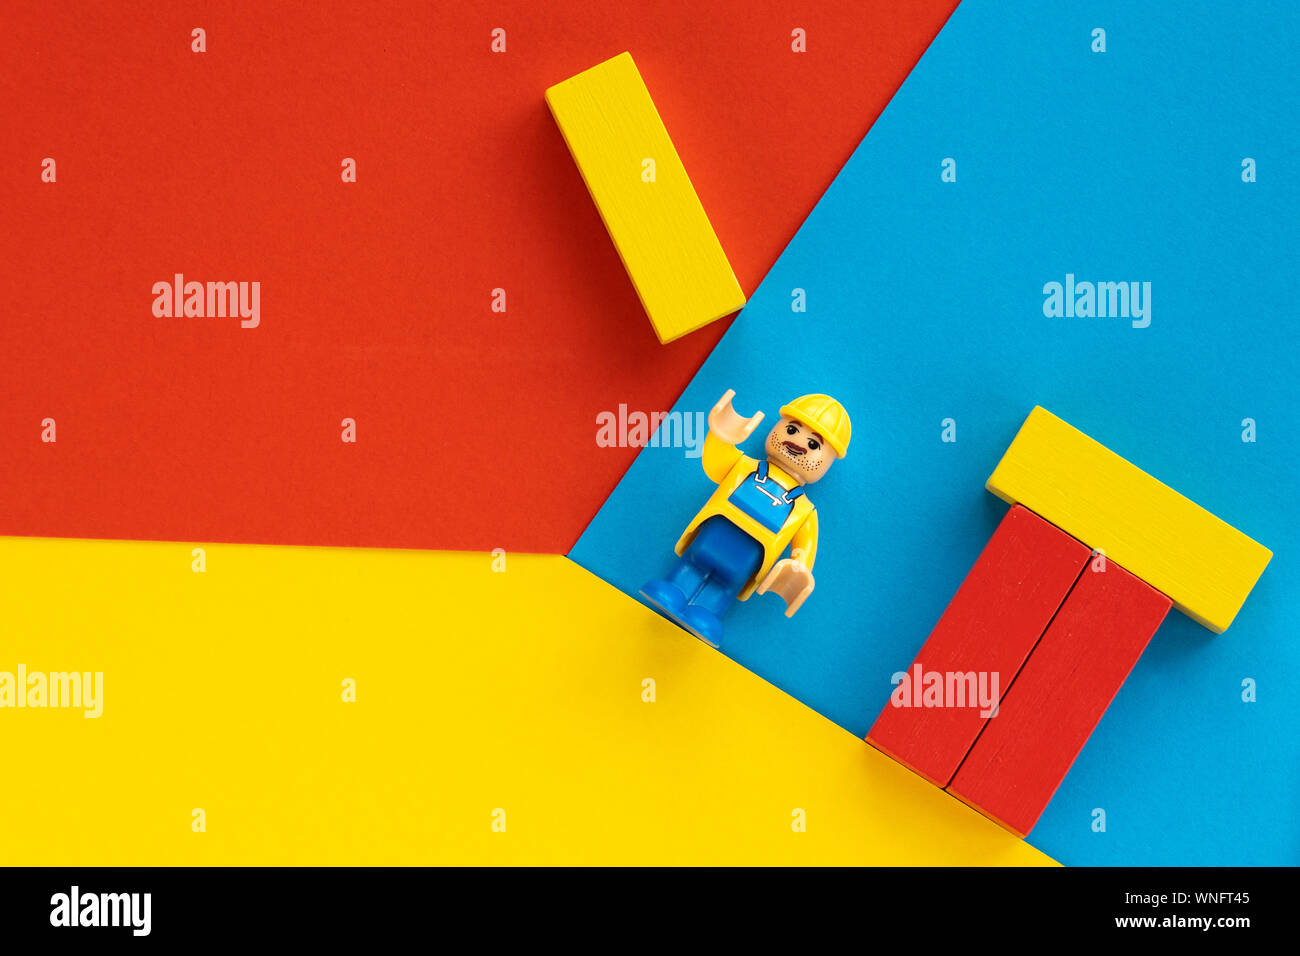 Milan, Italy - August 11 2019: Lego toy of engineer construction worker with helmet building a house. Geometric flat composition on multicoloured Stock Photo